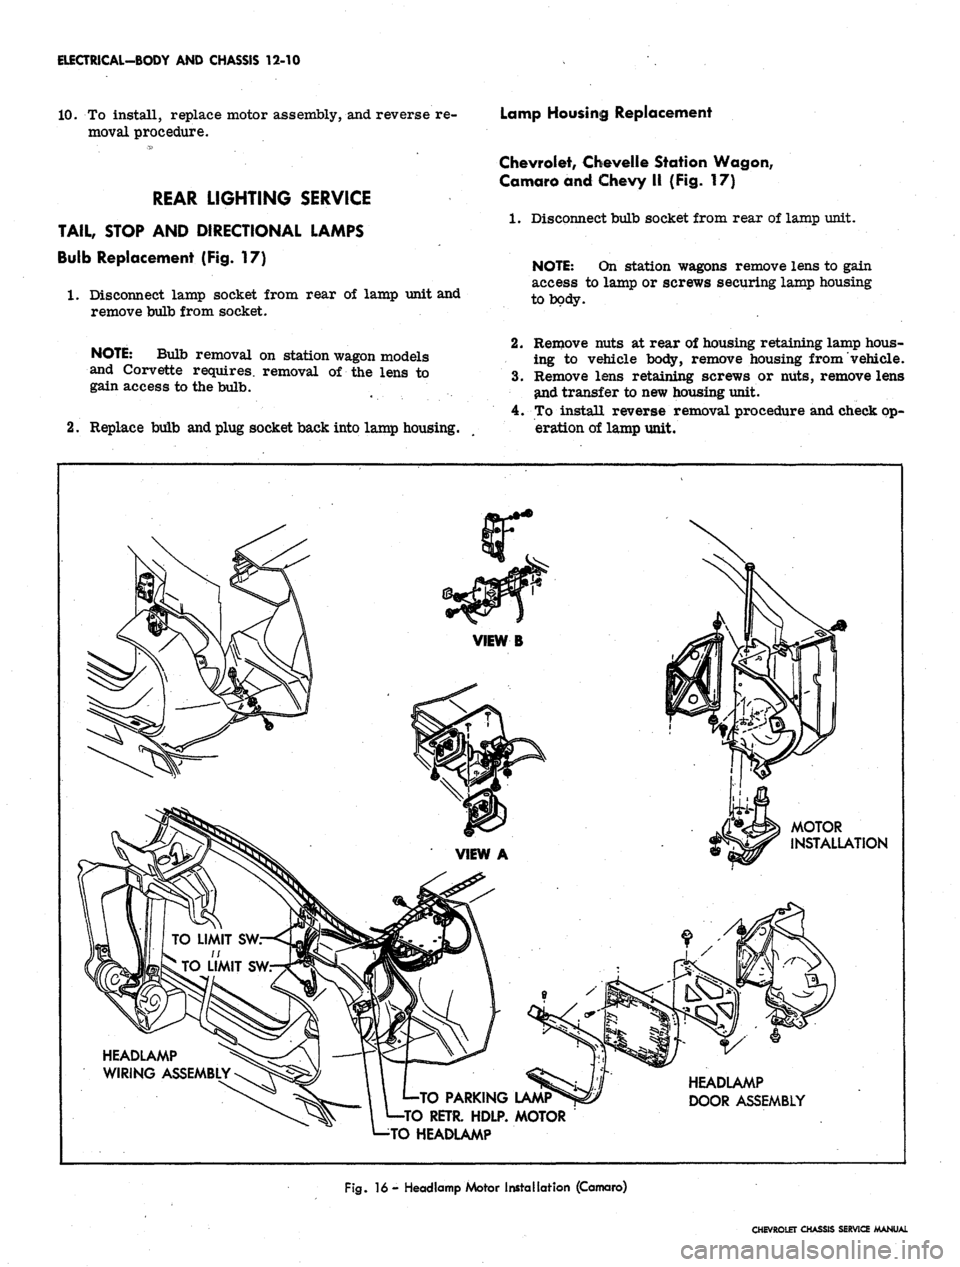 CHEVROLET CAMARO 1967 1.G Chassis User Guide 
ELECTRICAL-BODY AND CHASSIS 12-10

10.
 To install, replace motor assembly, and reverse re-

moval procedure.

REAR LIGHTING SERVICE

TAIL, STOP AND DIRECTIONAL LAMPS

Bulb Replacement (Fig. 17)

1.
